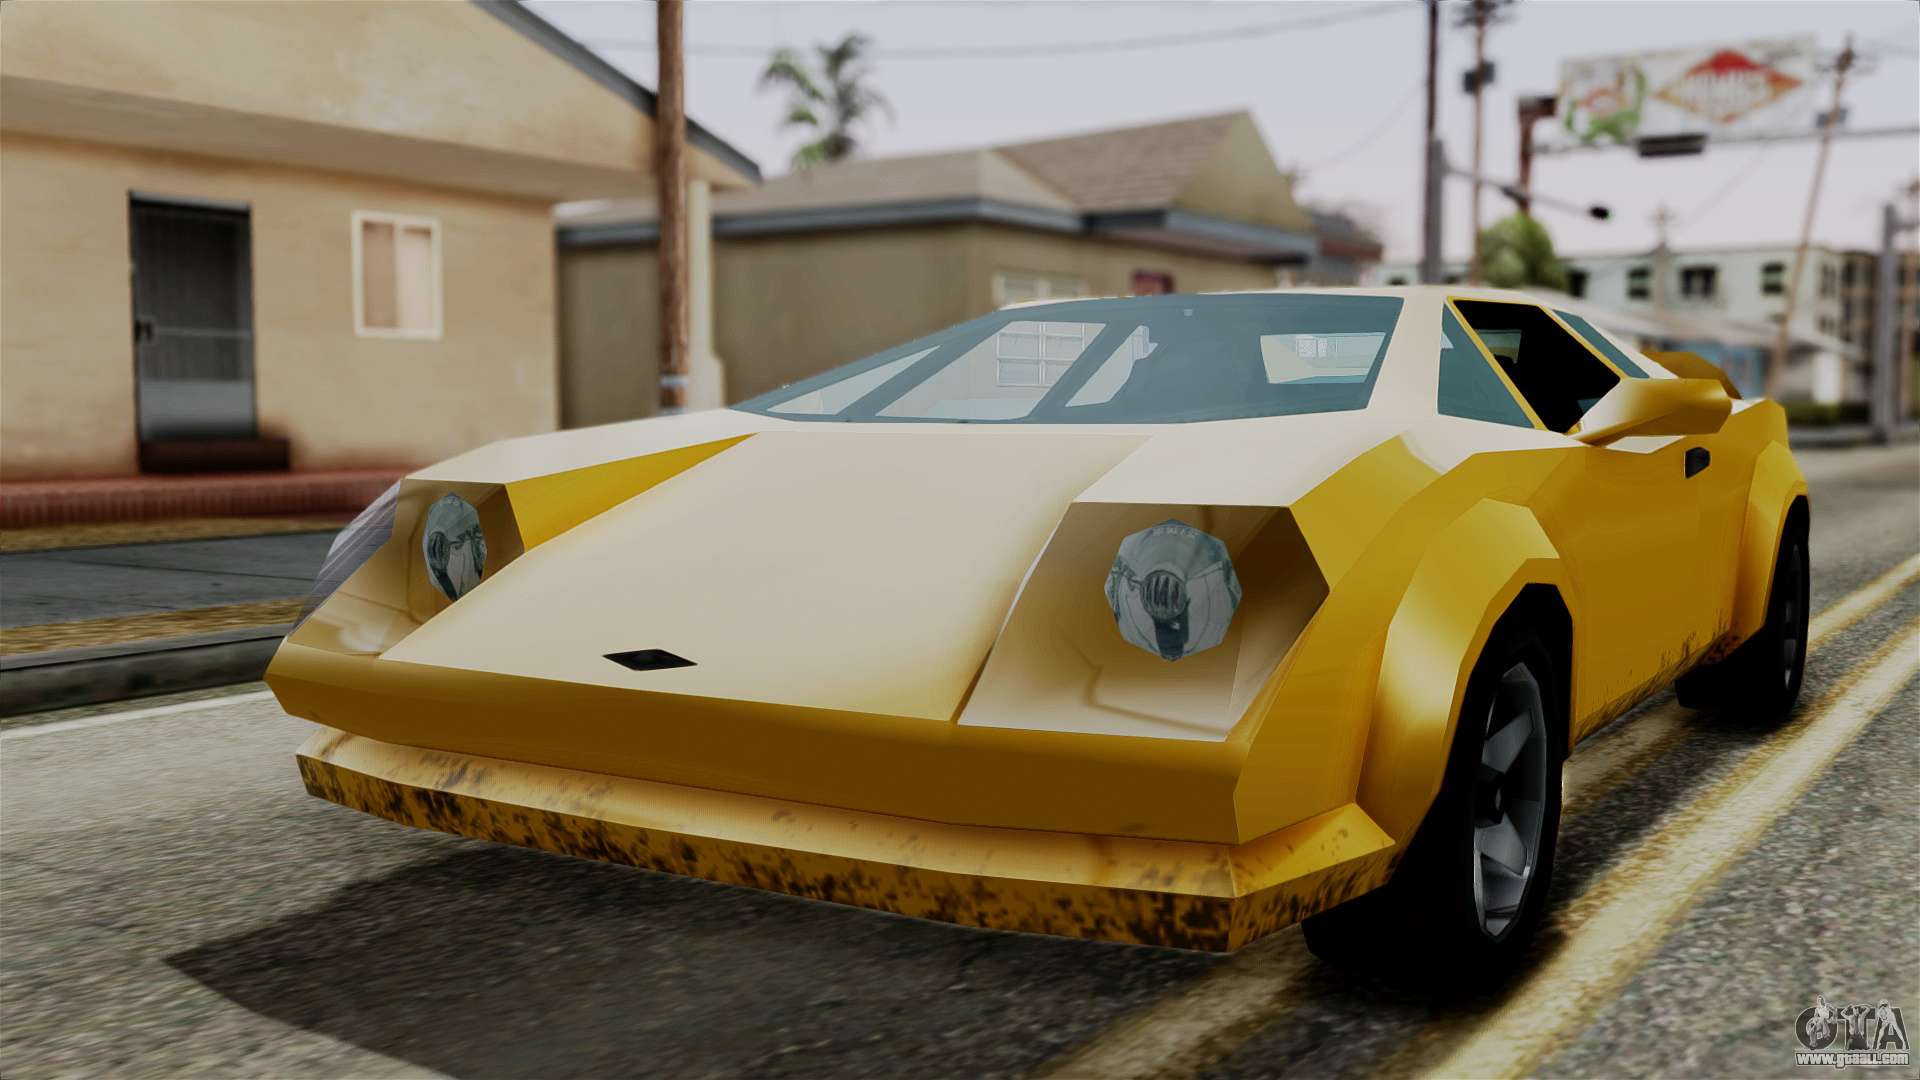 Files for GTA Vice City Stories: cars, mods, skins